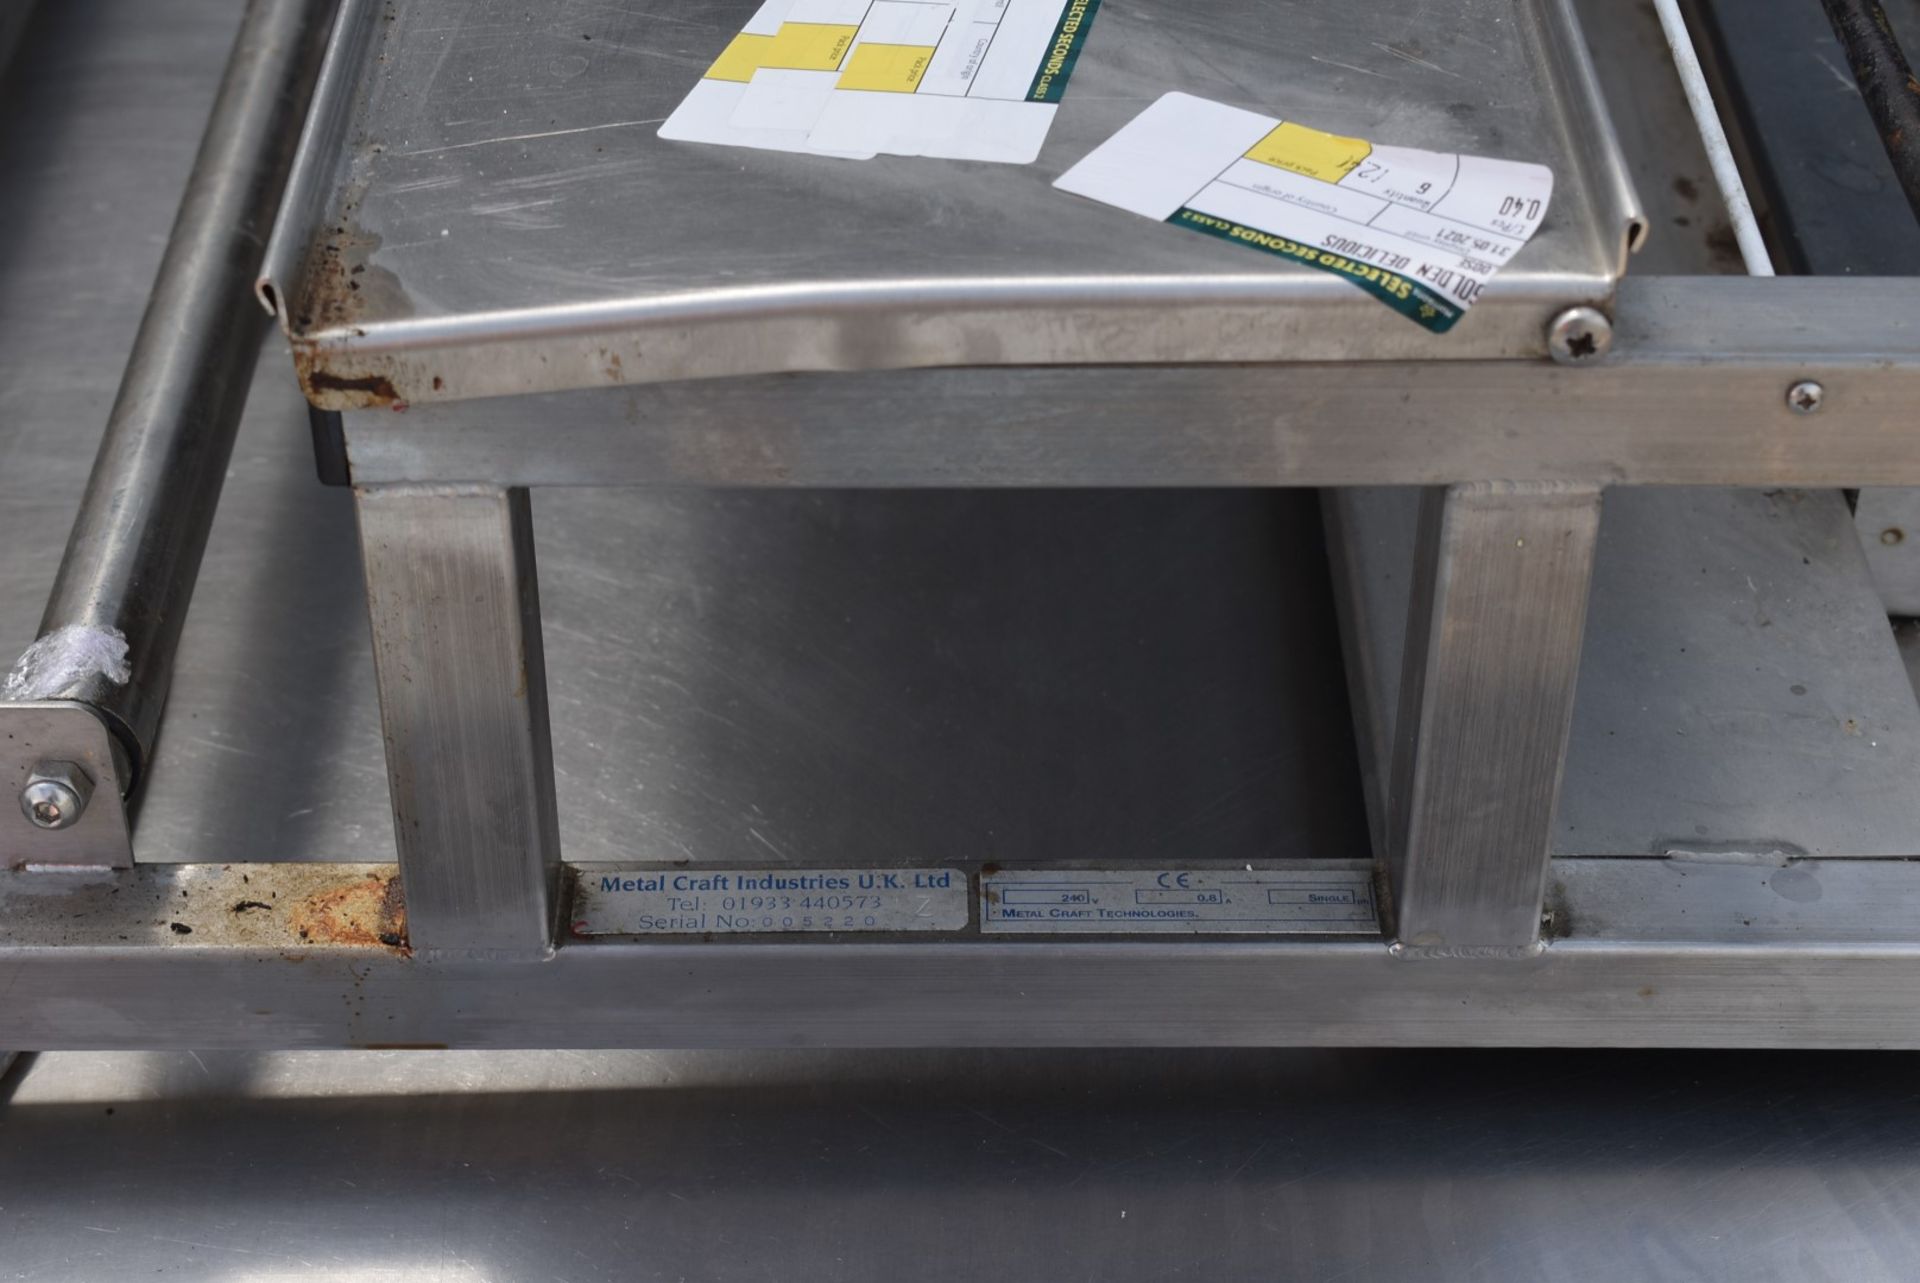 1 x Countertop Food Tray Wrapper Unit For Heat Sealed Wrapping - 56cm Wide - 240v - Recently Removed - Image 4 of 7